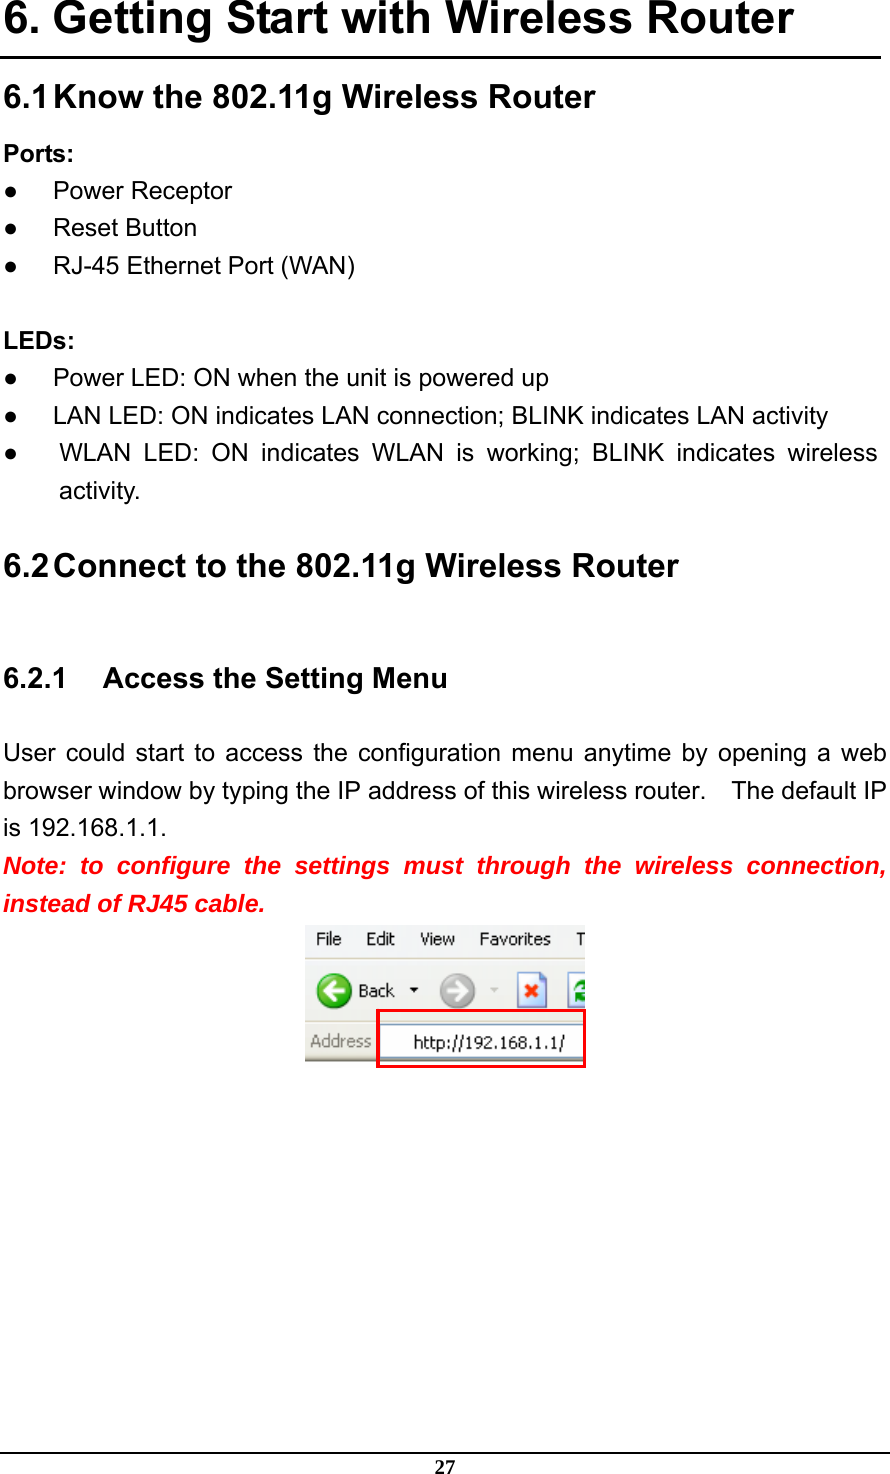 27 6. Getting Start with Wireless Router 6.1 Know the 802.11g Wireless Router Ports: ● Power Receptor ● Reset Button ●  RJ-45 Ethernet Port (WAN)  LEDs: ●  Power LED: ON when the unit is powered up ●  LAN LED: ON indicates LAN connection; BLINK indicates LAN activity ●  WLAN LED: ON indicates WLAN is working; BLINK indicates wireless activity. 6.2 Connect to the 802.11g Wireless Router 6.2.1  Access the Setting Menu User could start to access the configuration menu anytime by opening a web browser window by typing the IP address of this wireless router.    The default IP is 192.168.1.1.   Note: to configure the settings must through the wireless connection, instead of RJ45 cable.  